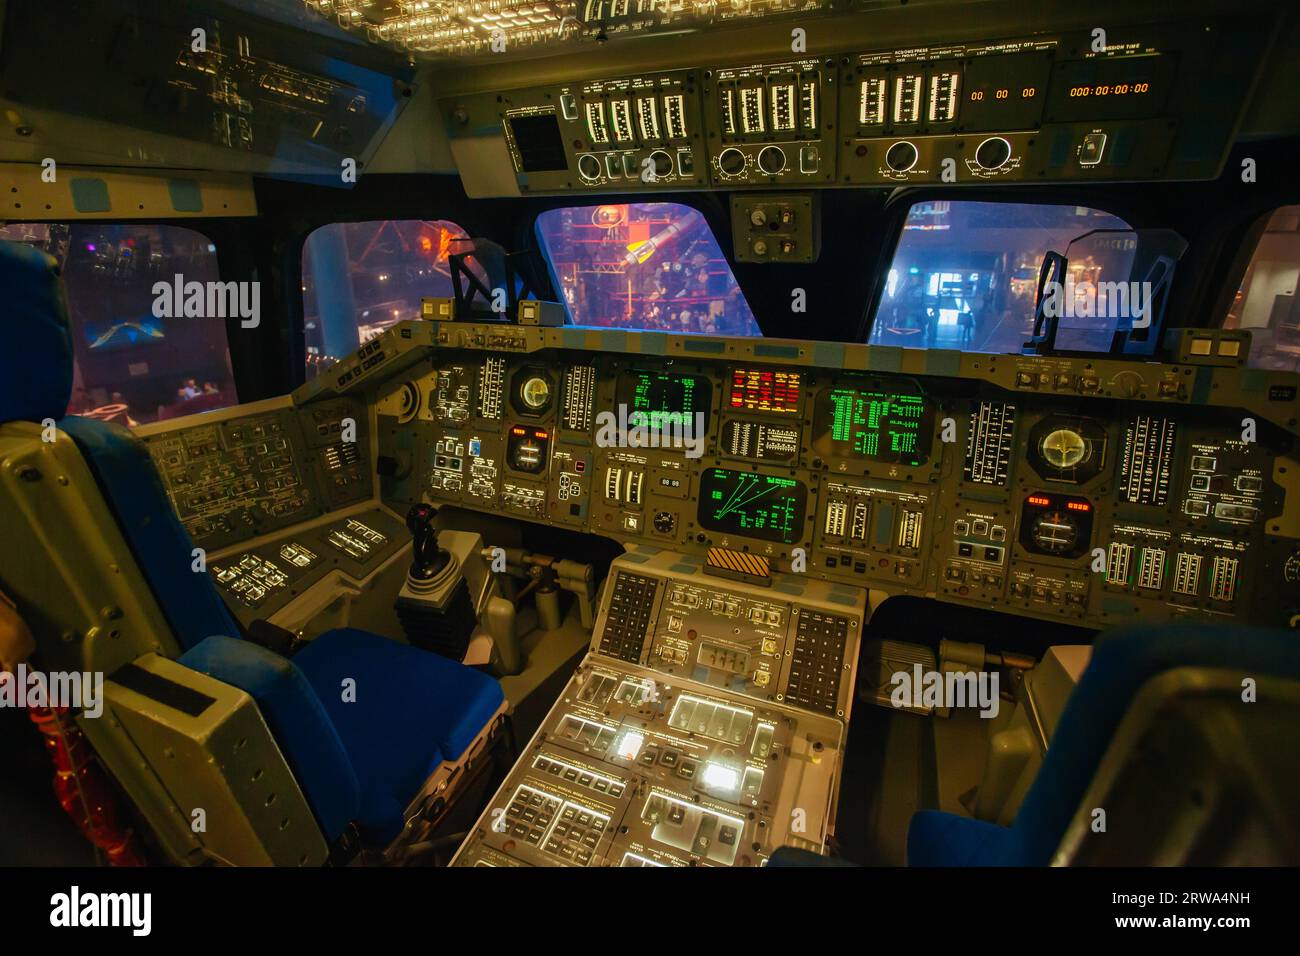 Houston, USA, January 26, 2013: A Space Shuttle cockpit on display at Houston Space Center in Texas, USA Stock Photo